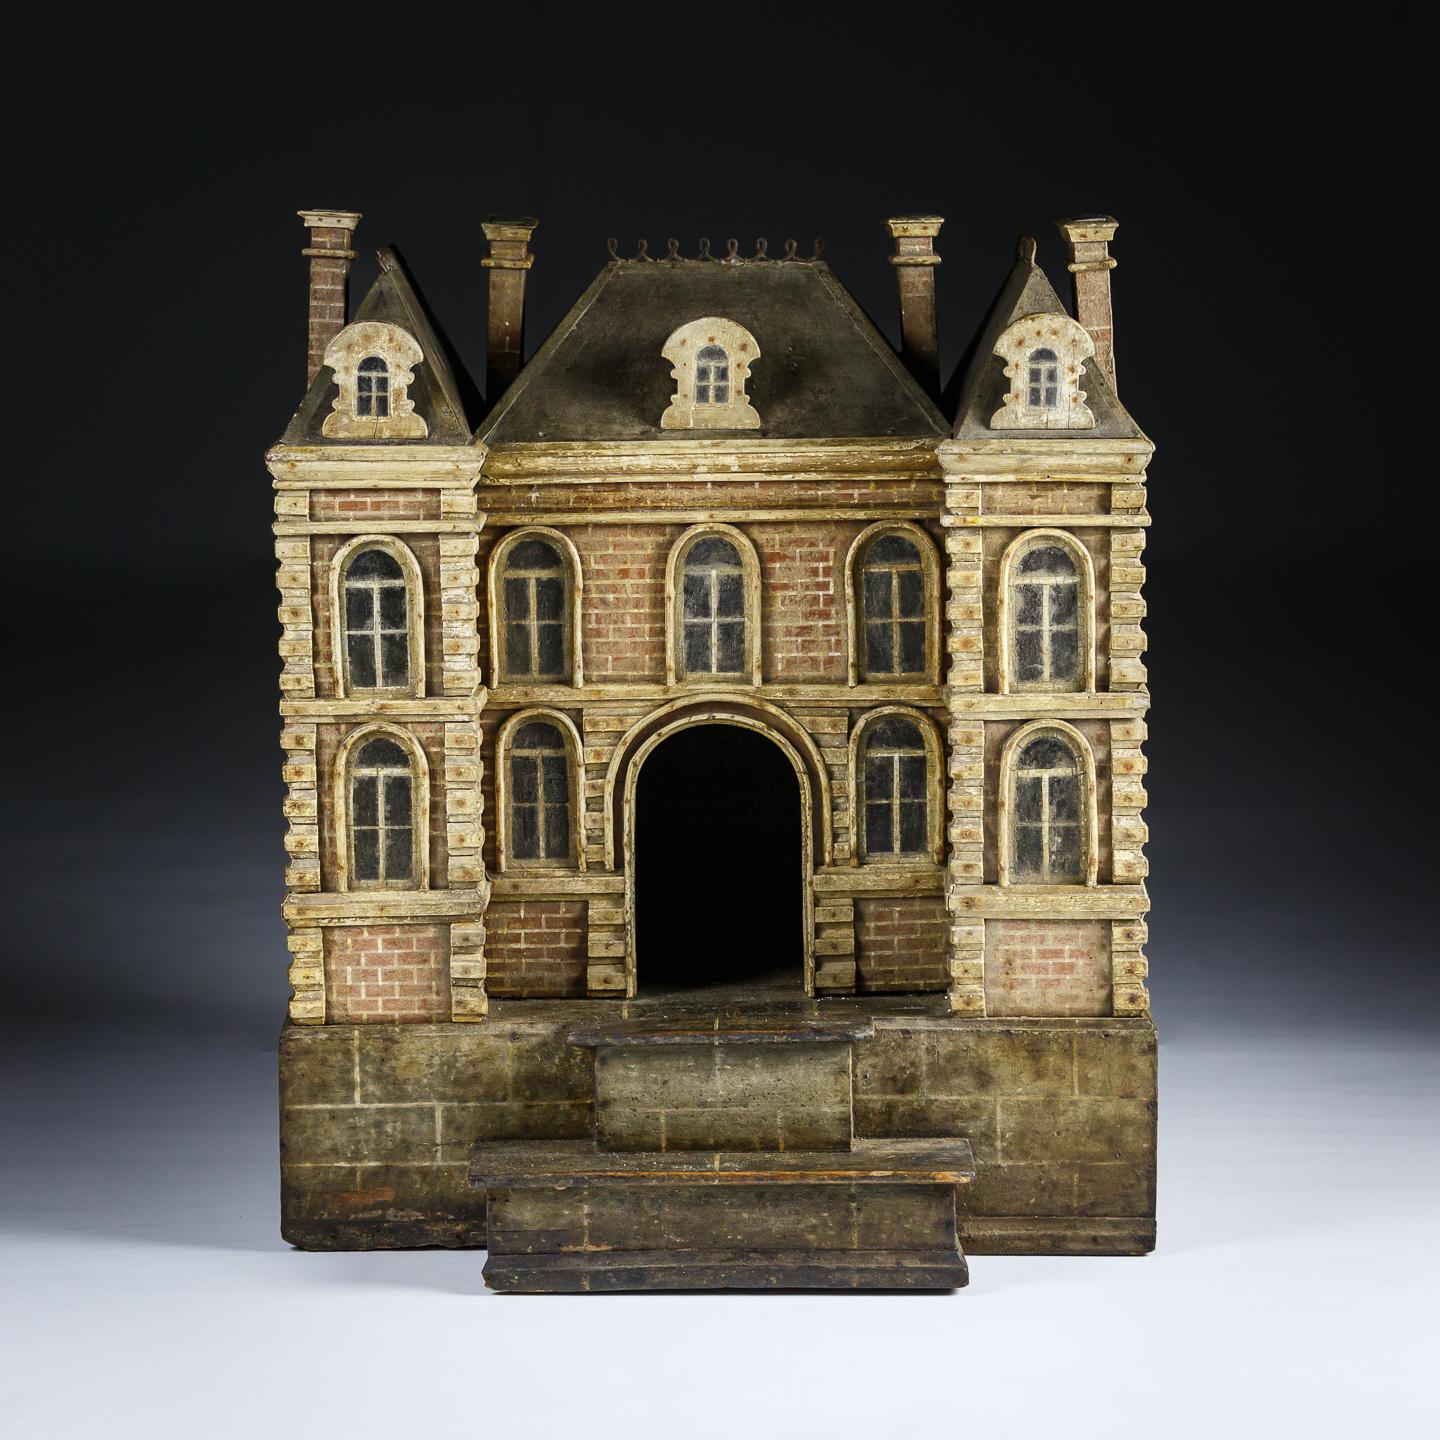 Extraordinary Early 19th Century Chateau Model found untouched in its original painted finish. impressive attention to detail with some carved brickwork, ironwork ridge decoration and Oeil - de - boeuf windows. France, circa 1820.